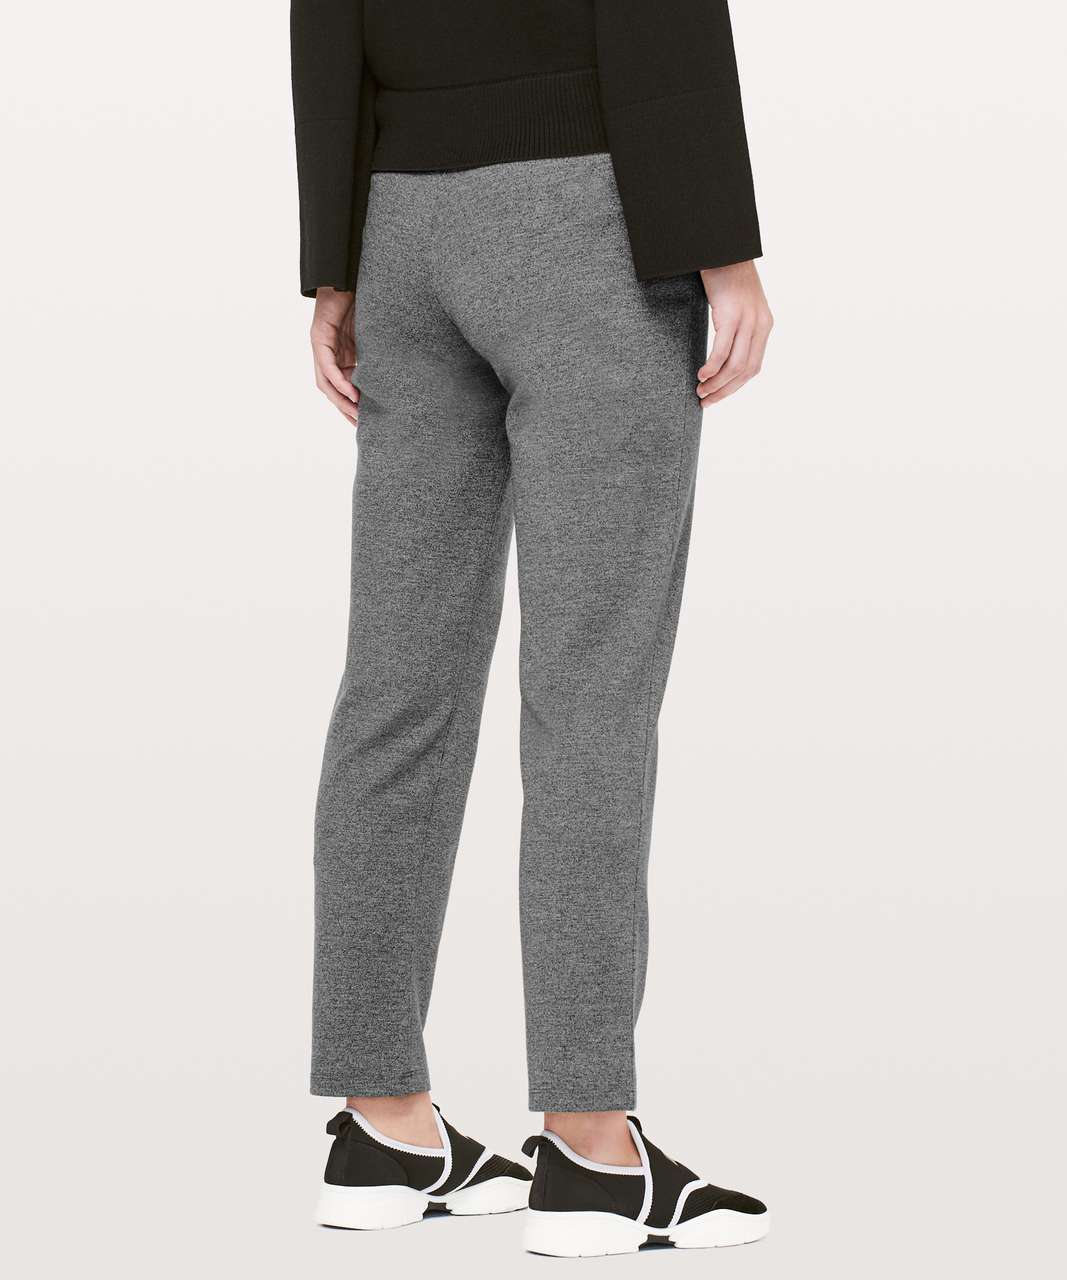 on the move pant lululemon review